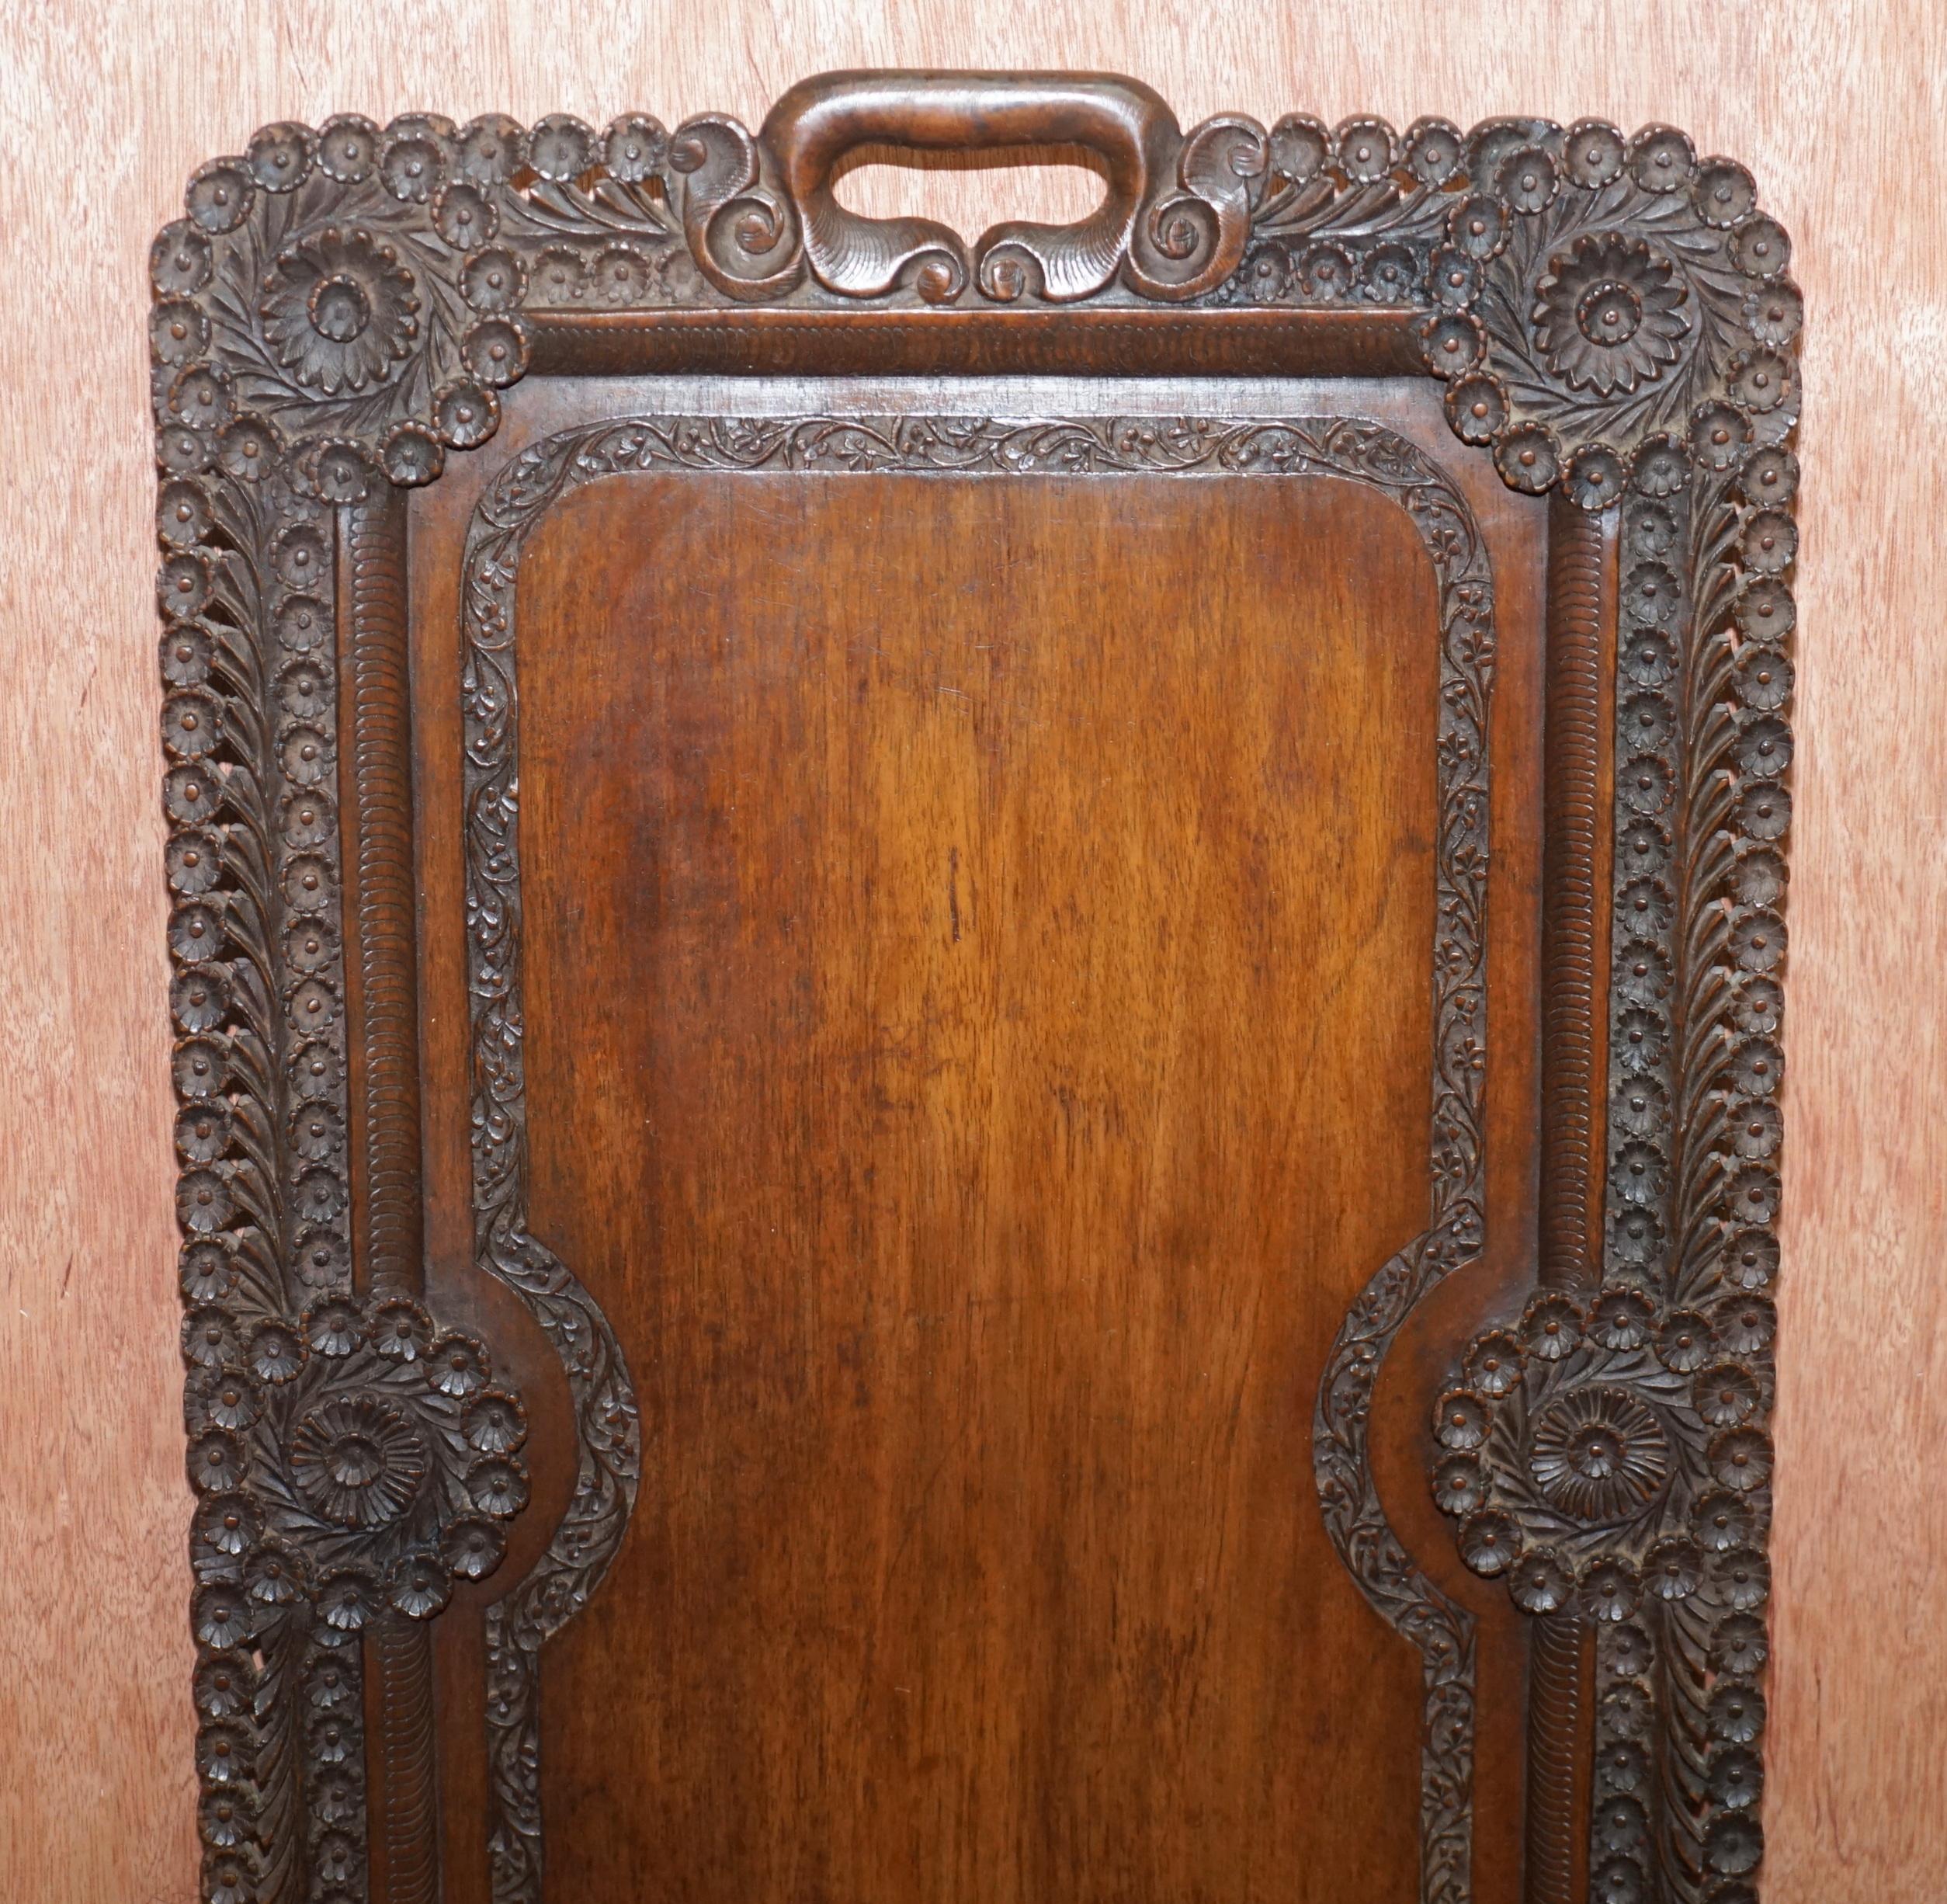 Hand-Carved Lovely circa 1900 Anglo-Indian Hand Carved Burmese Wood Serving Tray